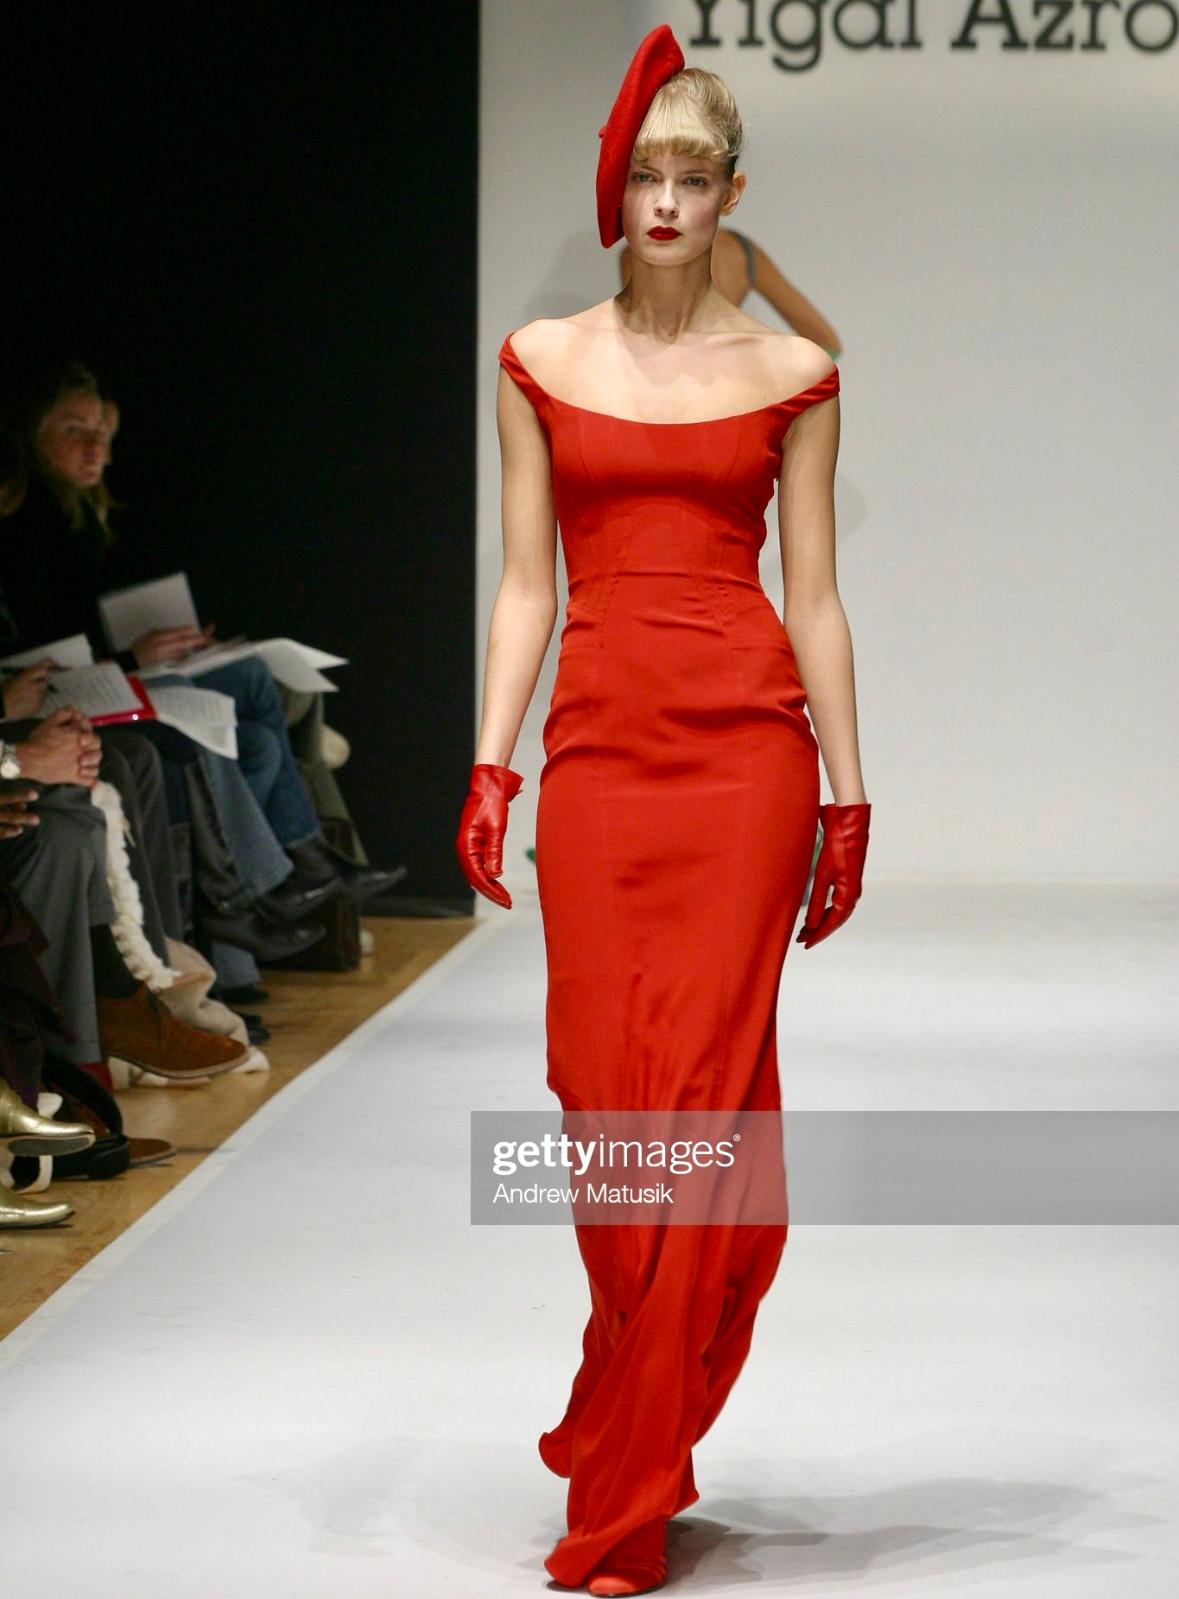 Presenting a stunning bright red Yigal Azrouël bodycon gown. From the Fall/Winter 2004 collection, this dress debuted on the season's runway in NYC. This chic dress is constructed entirely of a luxurious silk satin and features a wide scoop